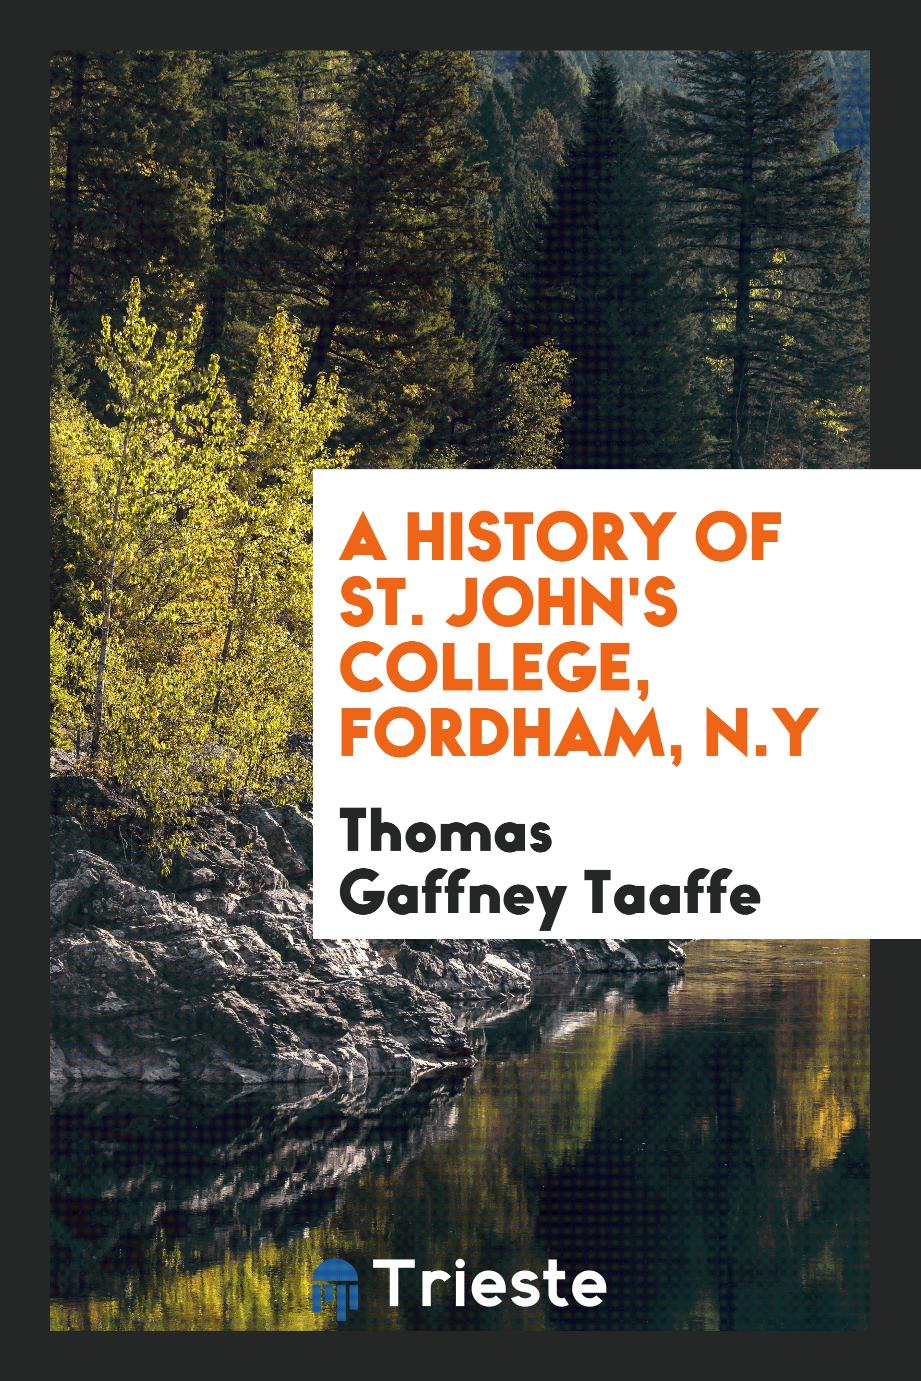 A history of St. John's College, Fordham, N.Y